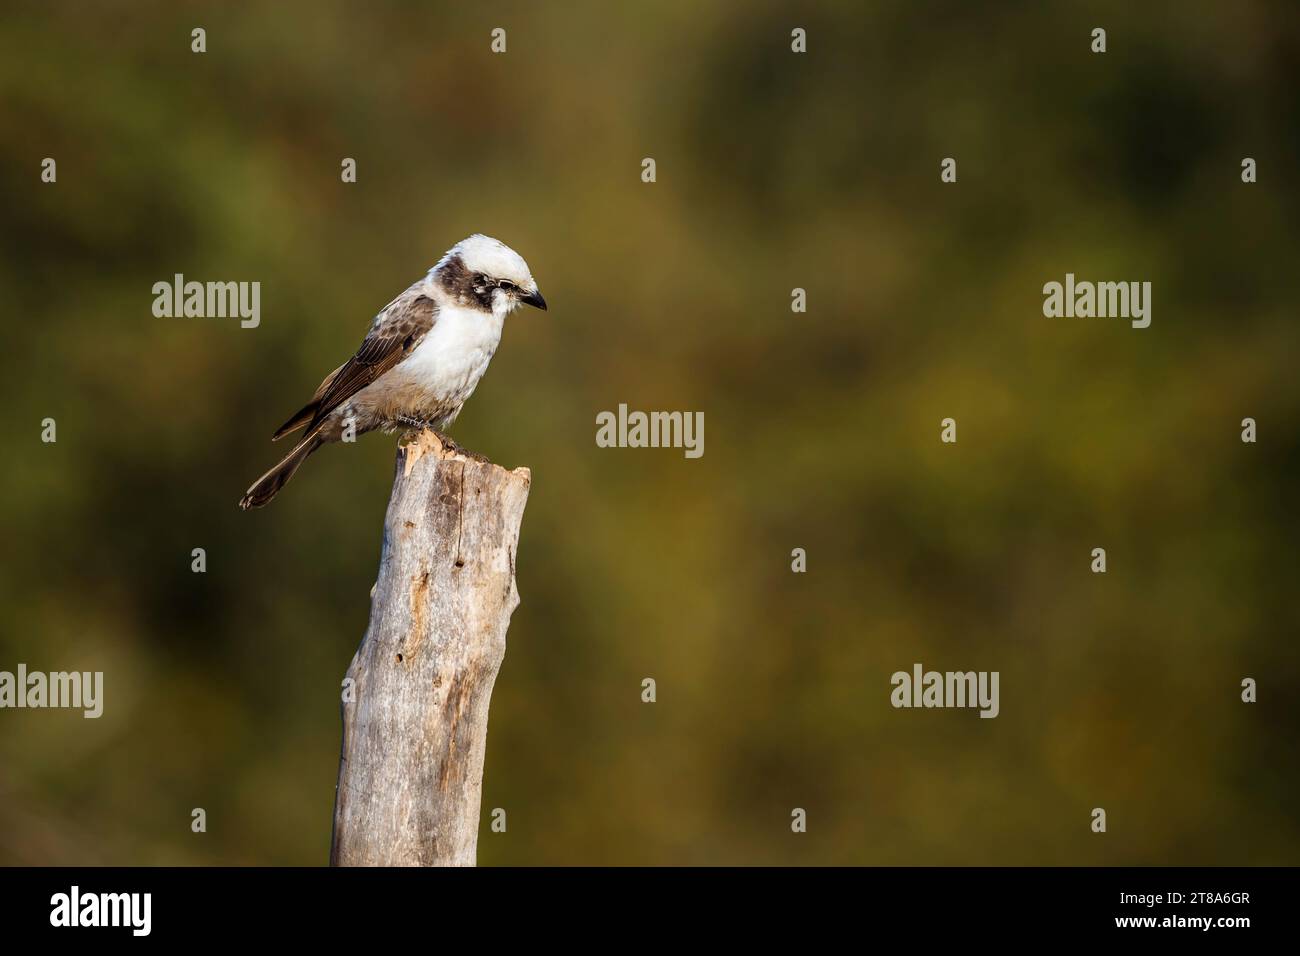 White crowned Shrike standing on a log isolated in natural background in Kruger National park, South Africa ; Specie Eurocephalus anguitimens family o Stock Photo